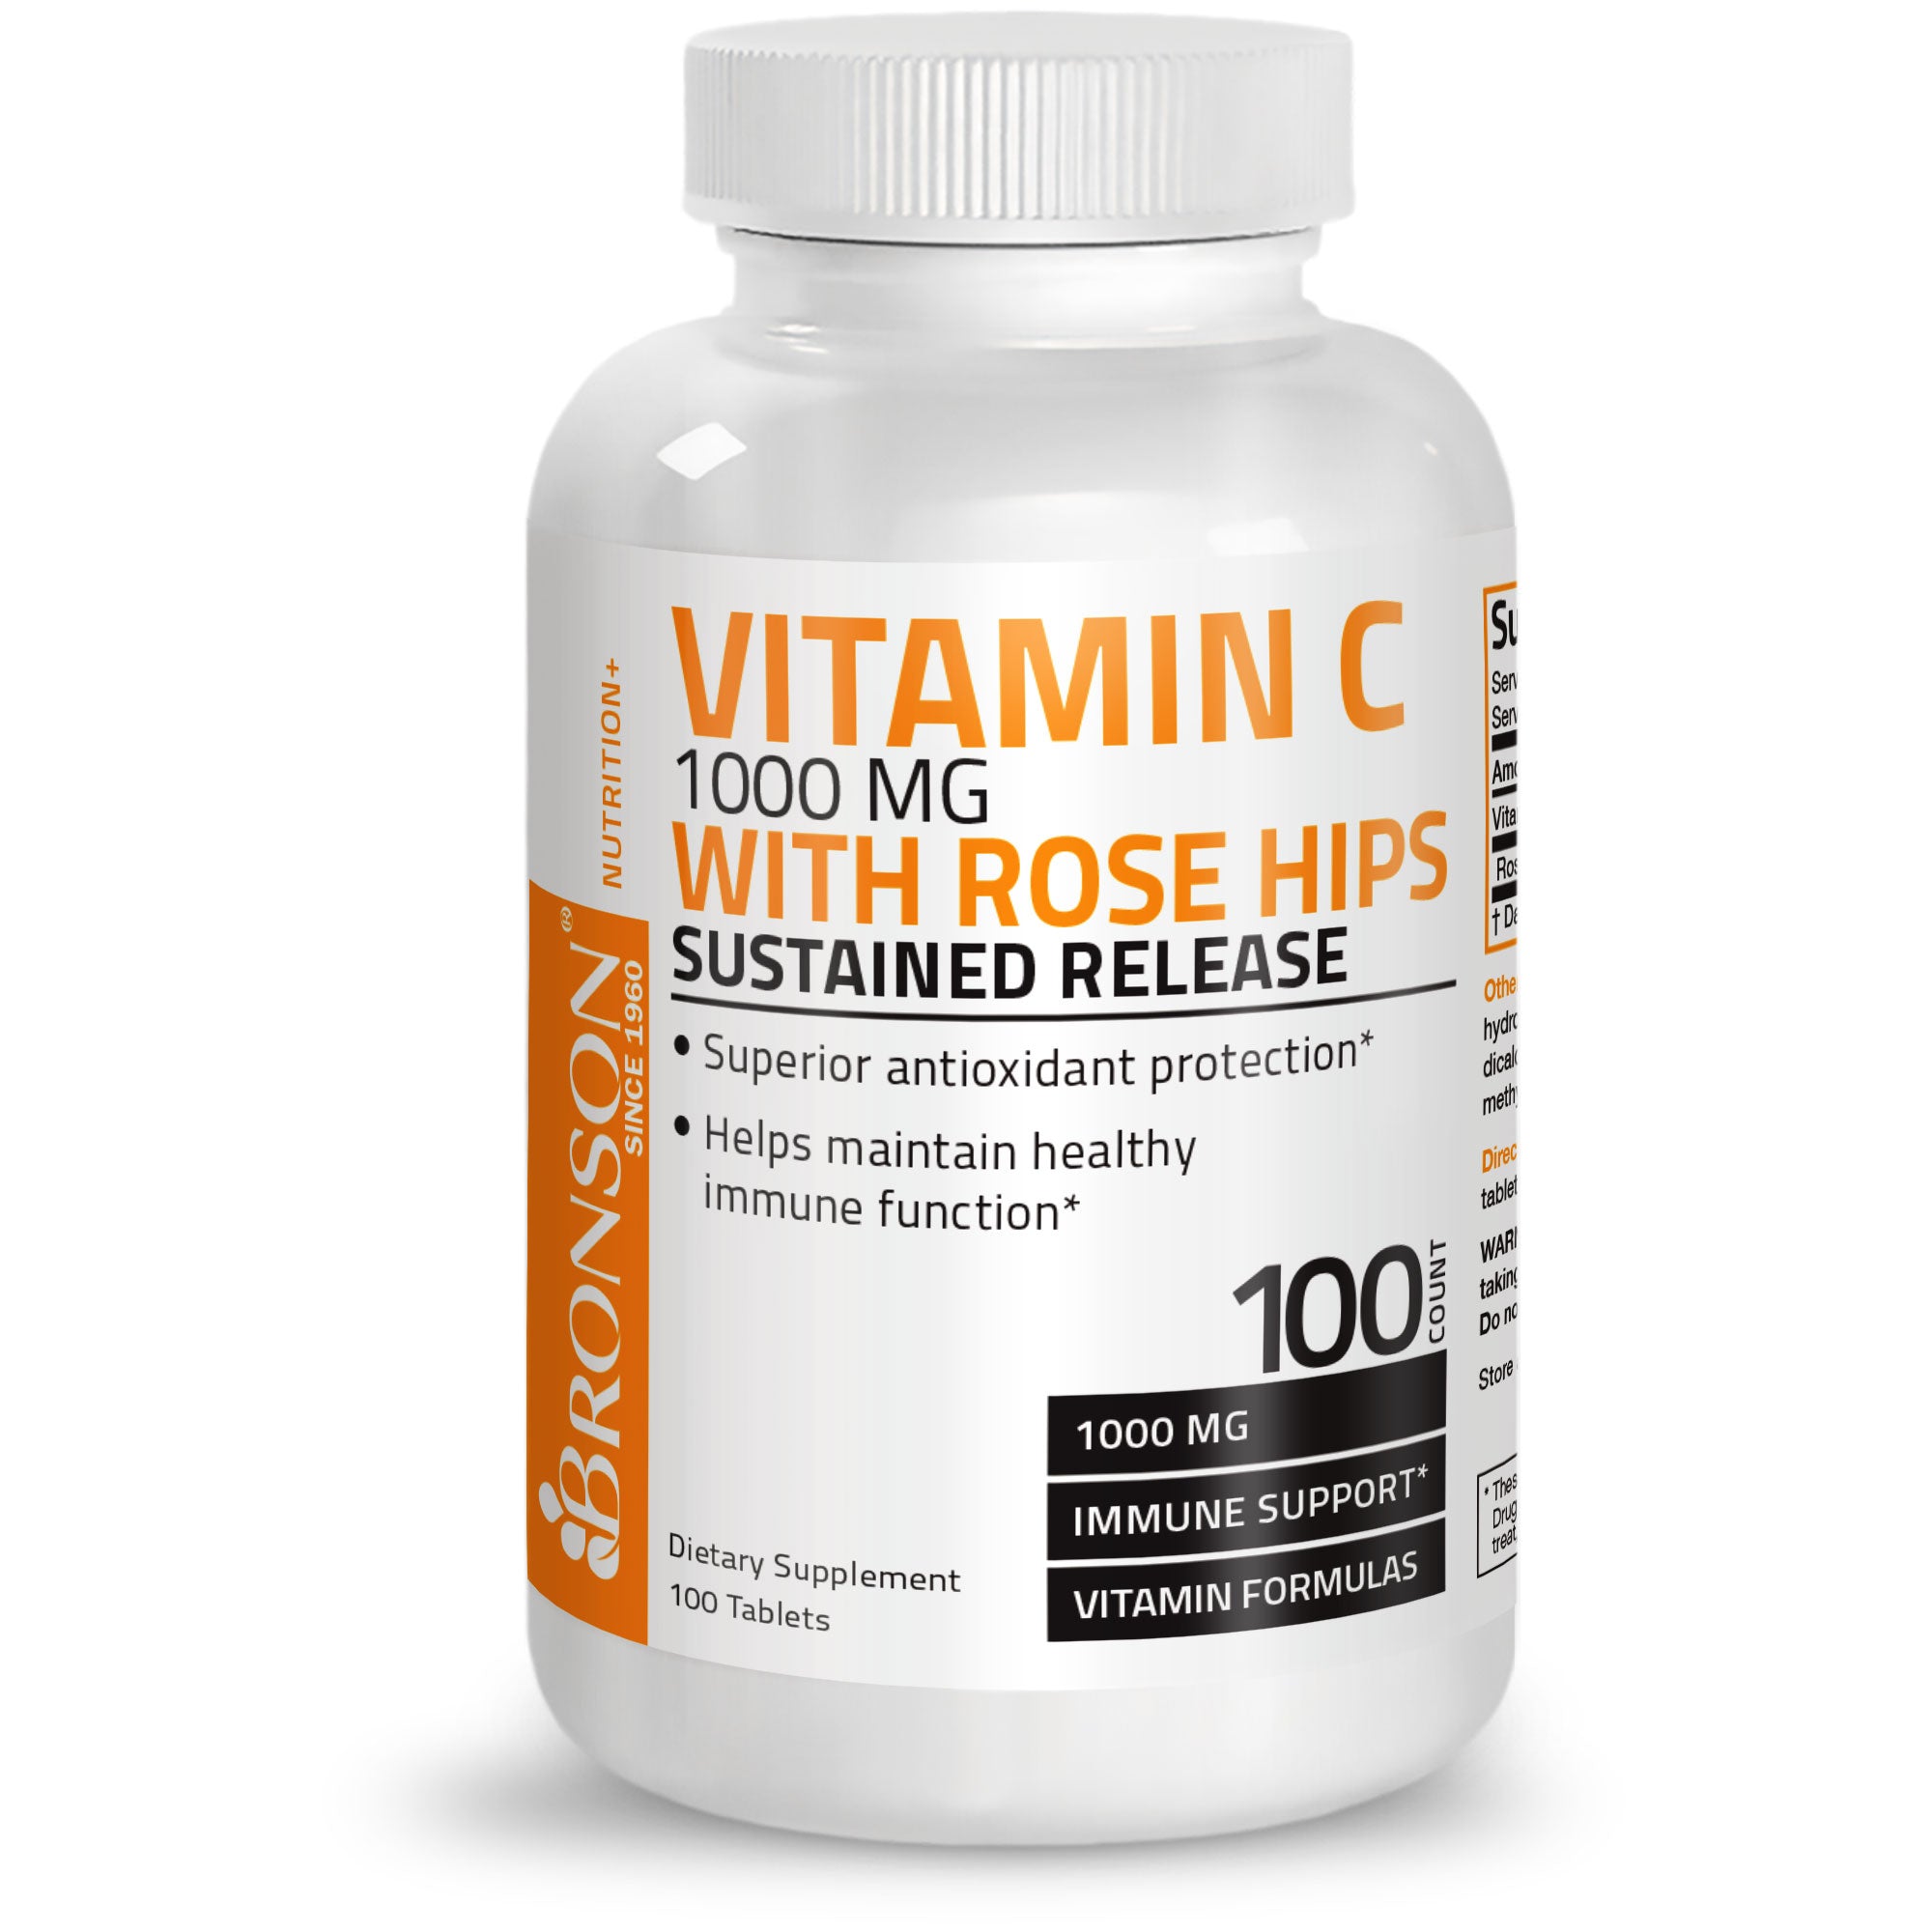 Vitamin C Ascorbic Acid Sustained Release with Rose Hips - 1,000 mg view 7 of 4